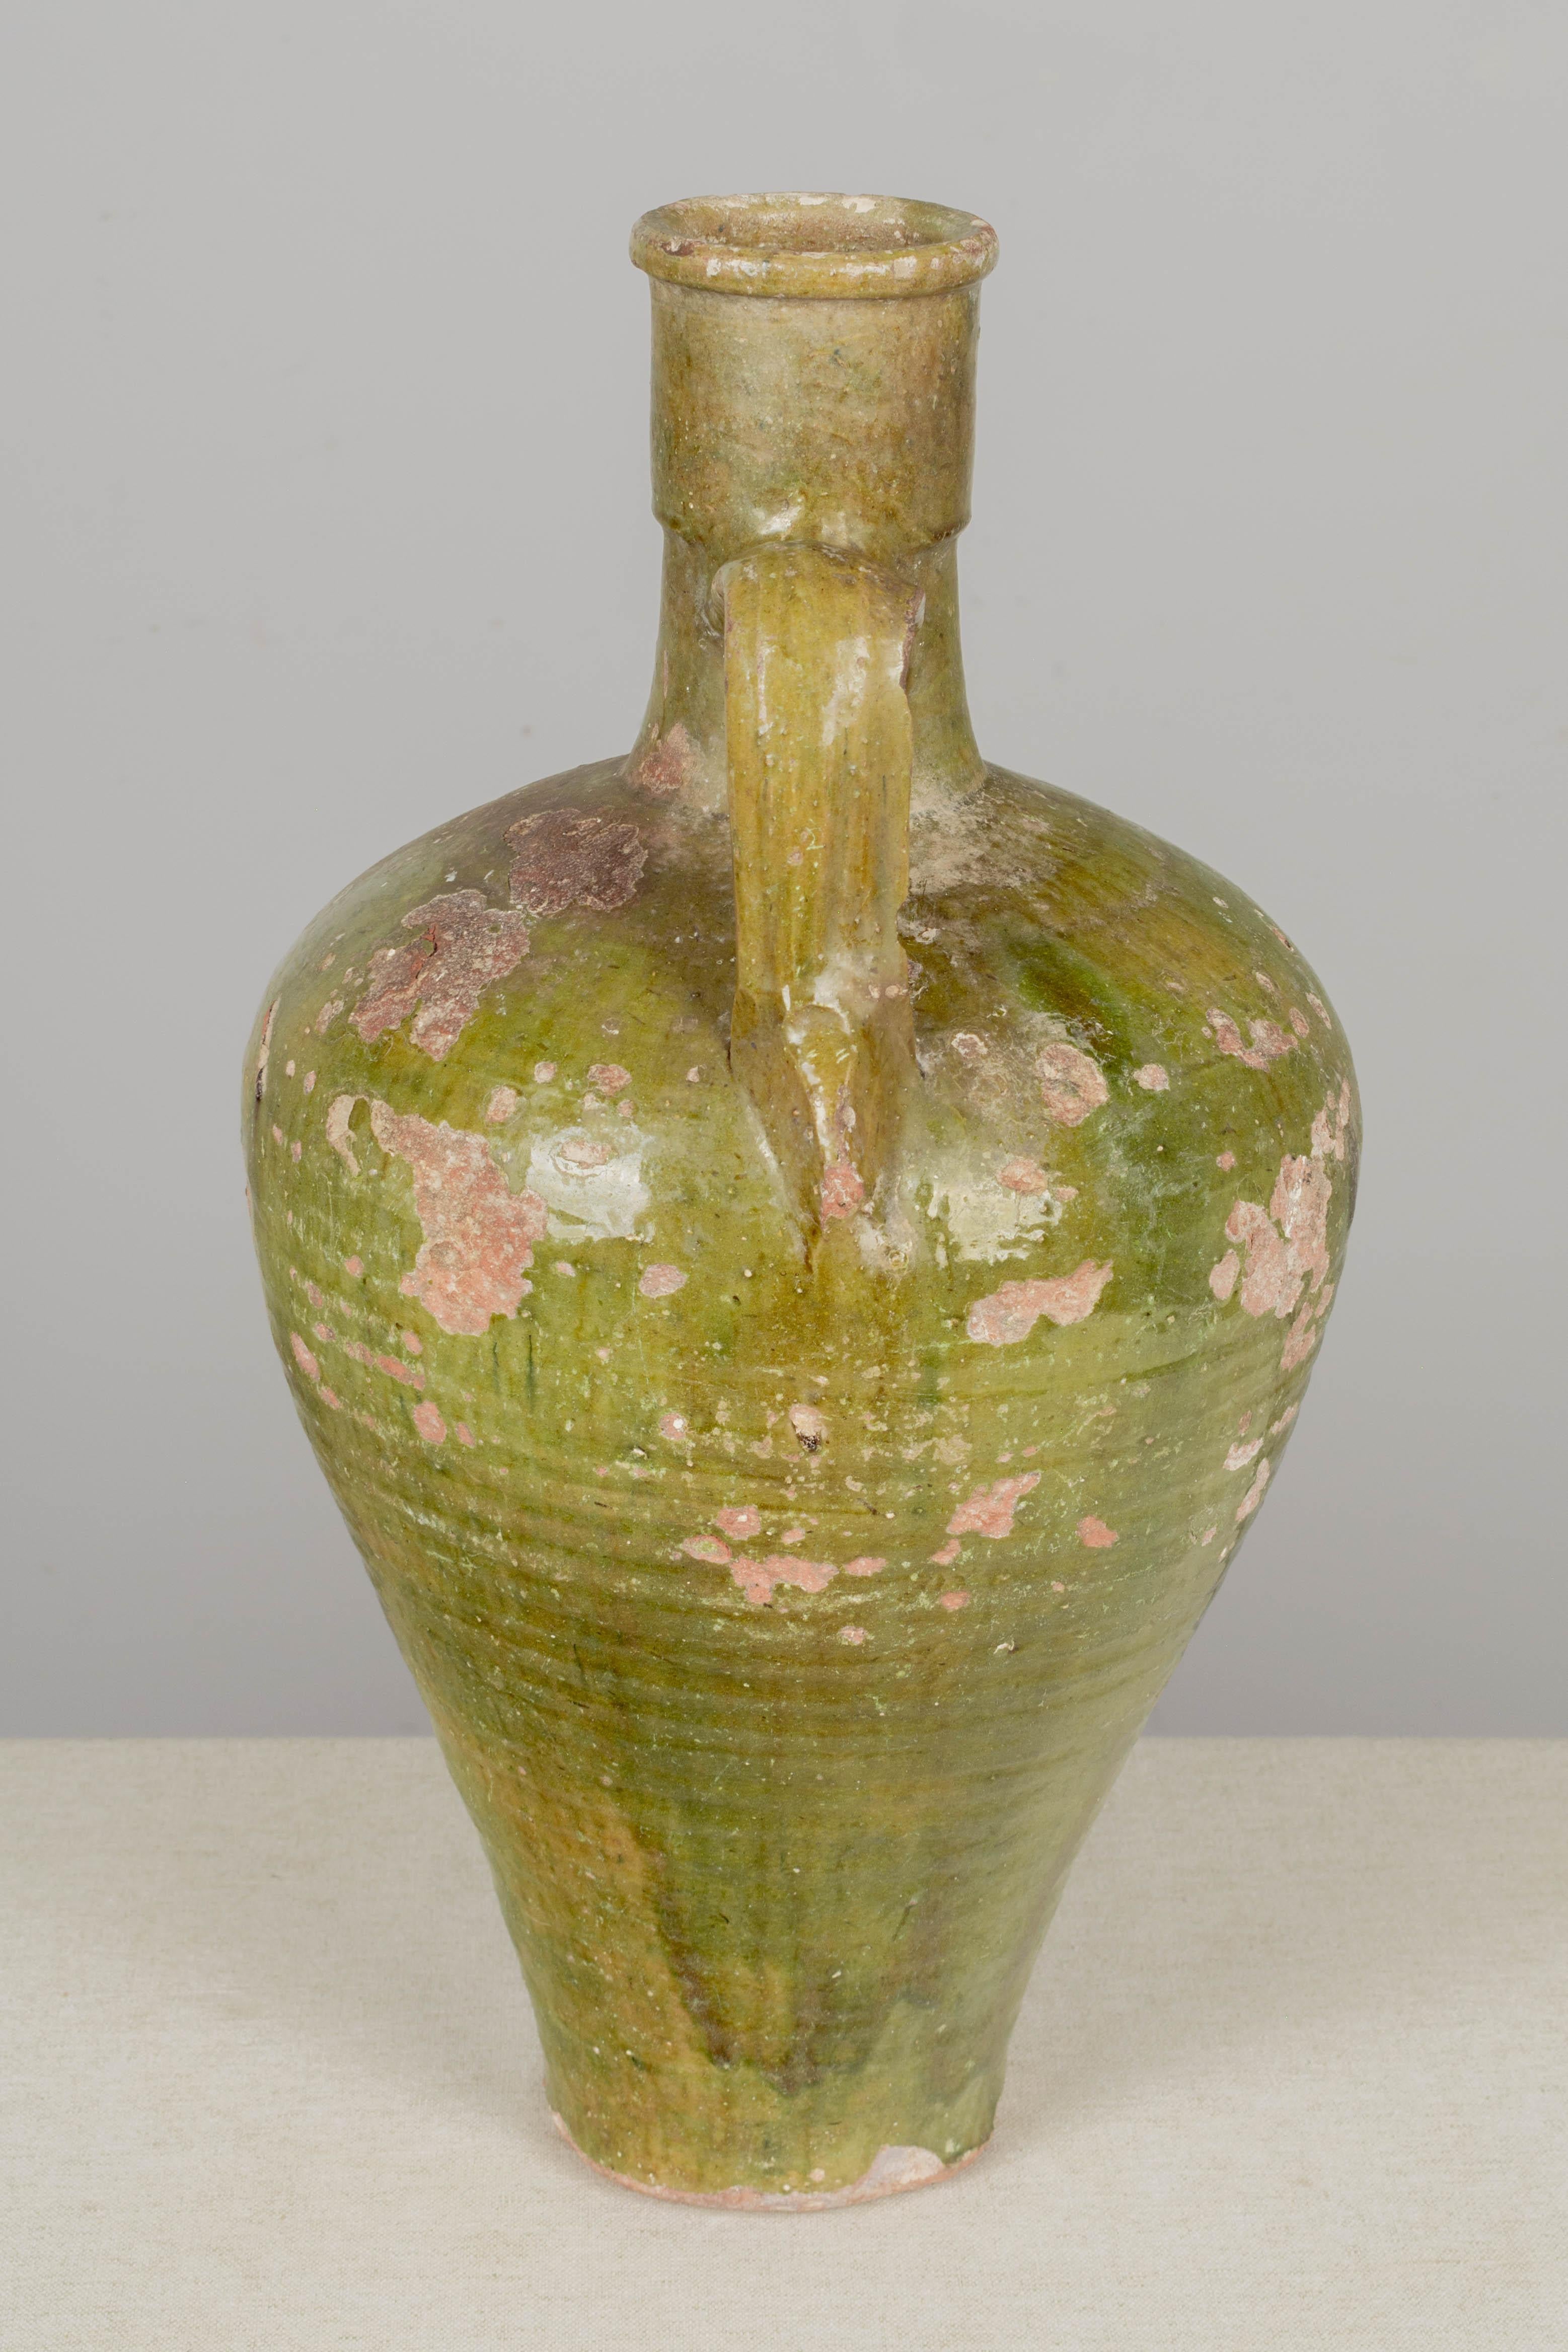 Glazed Early 19th Century French Pottery Water Jar